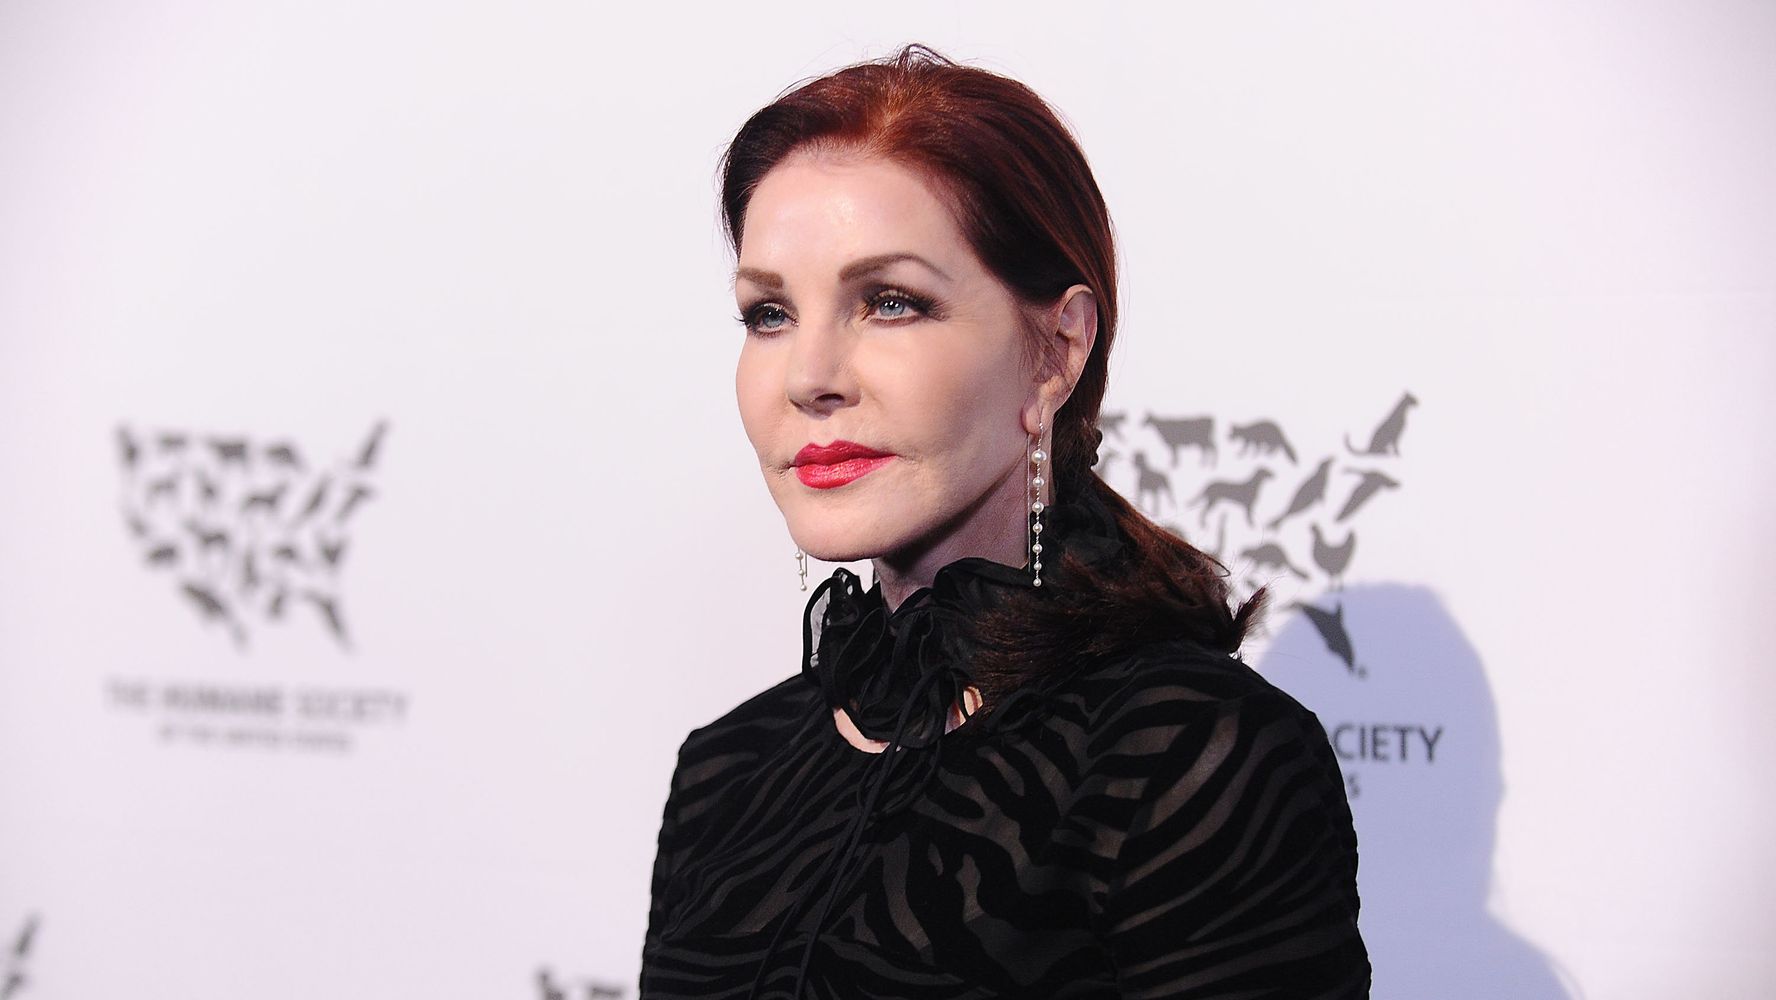 Priscilla Presley Is Caring For Granddaughters As Lisa Marie's Ex Faces ...